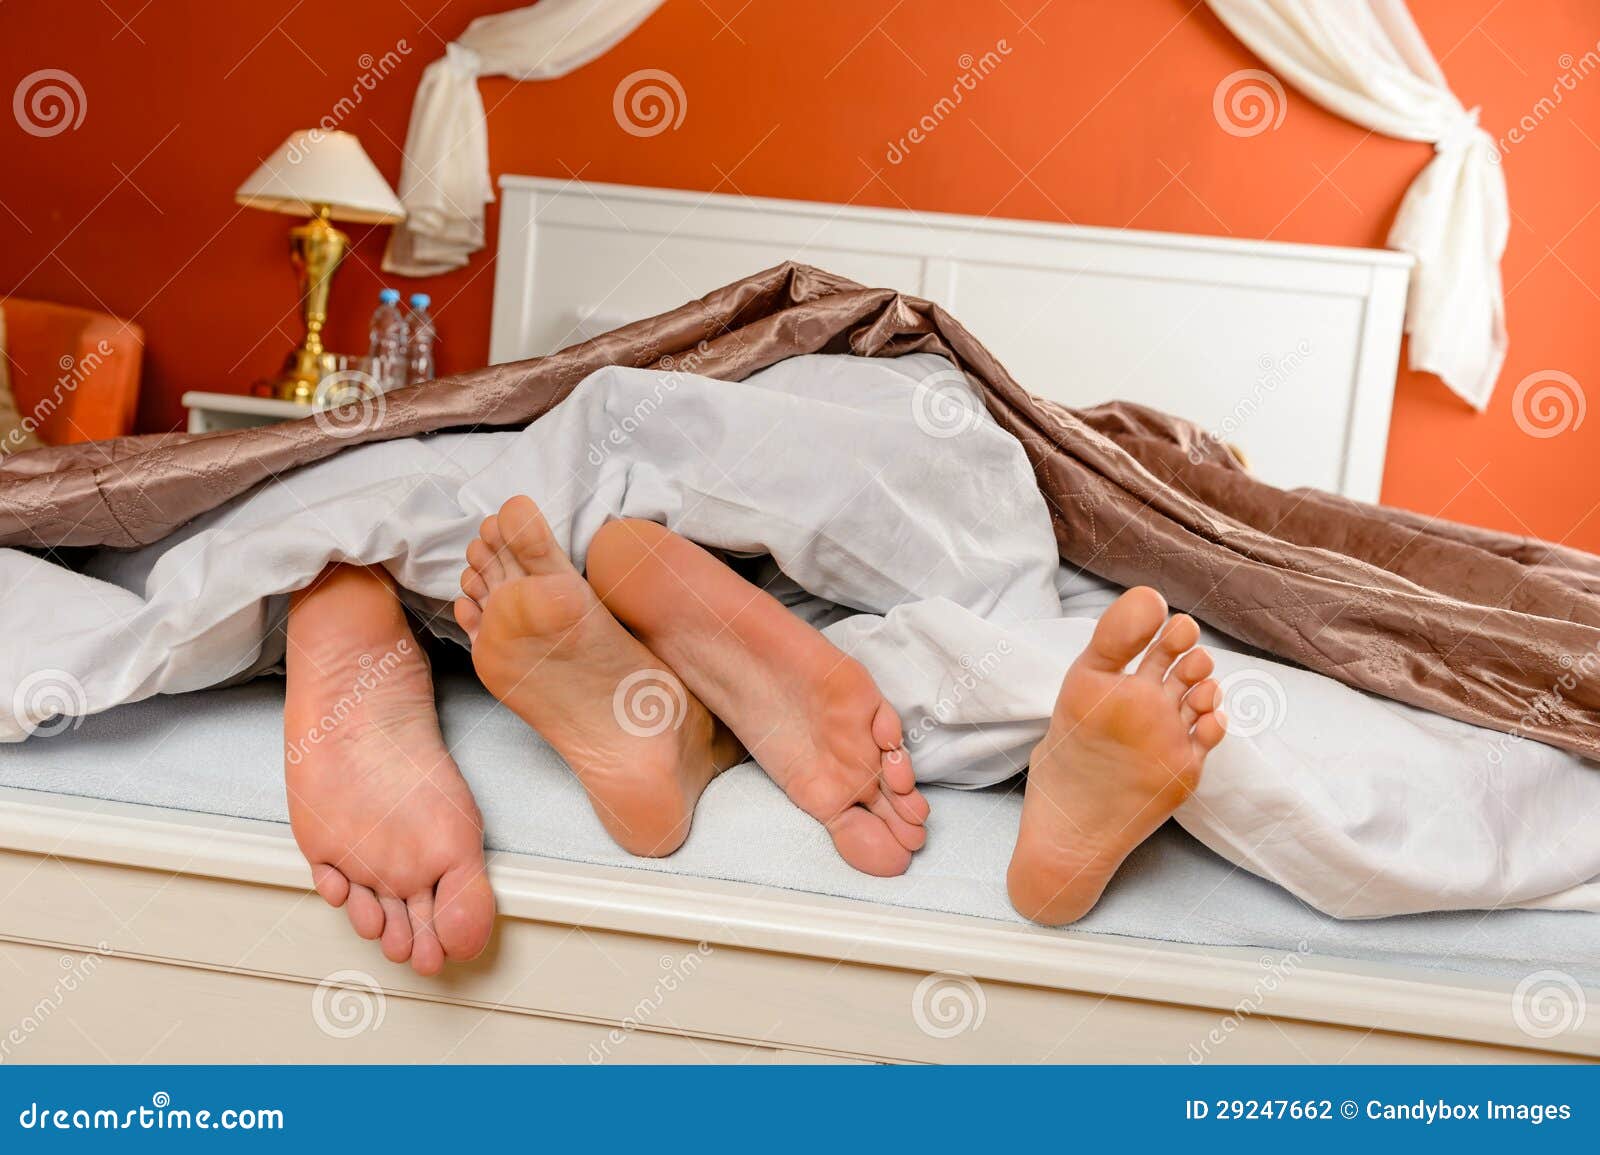 napping couple barefoot lying under covers bed